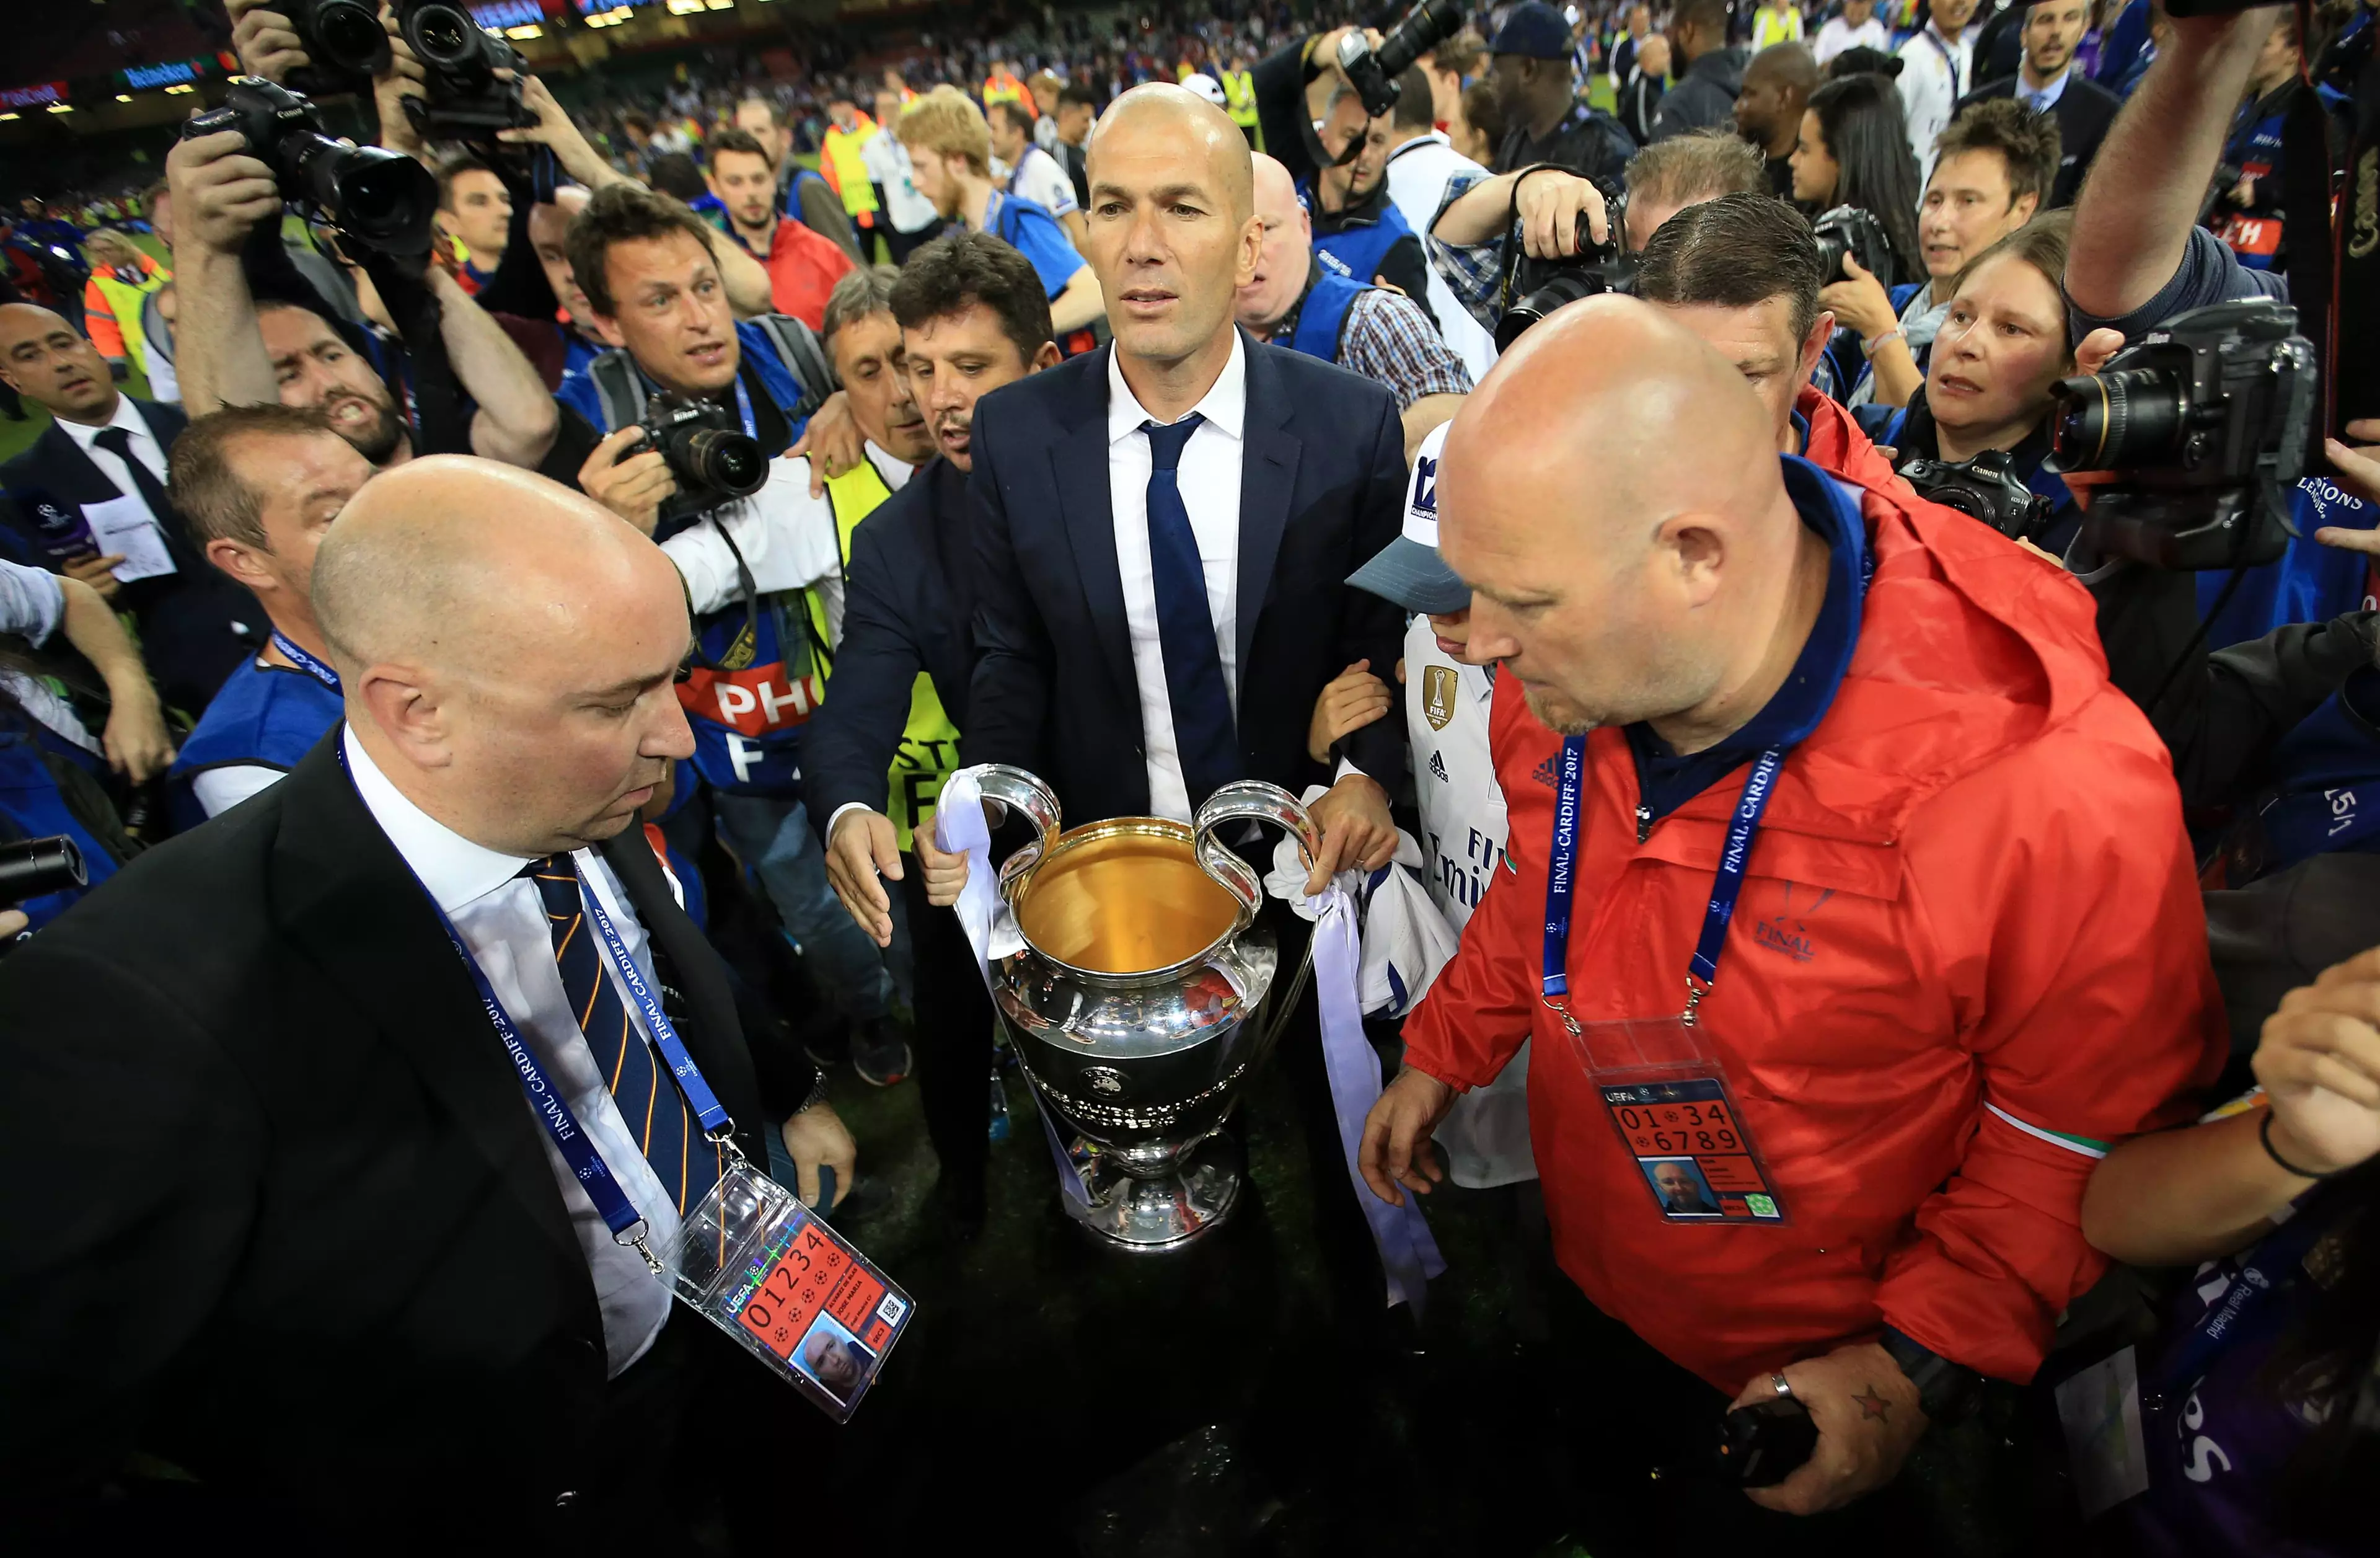 Zidane has two Champions League wins in his first 18 months as a manager. Image: PA Images.